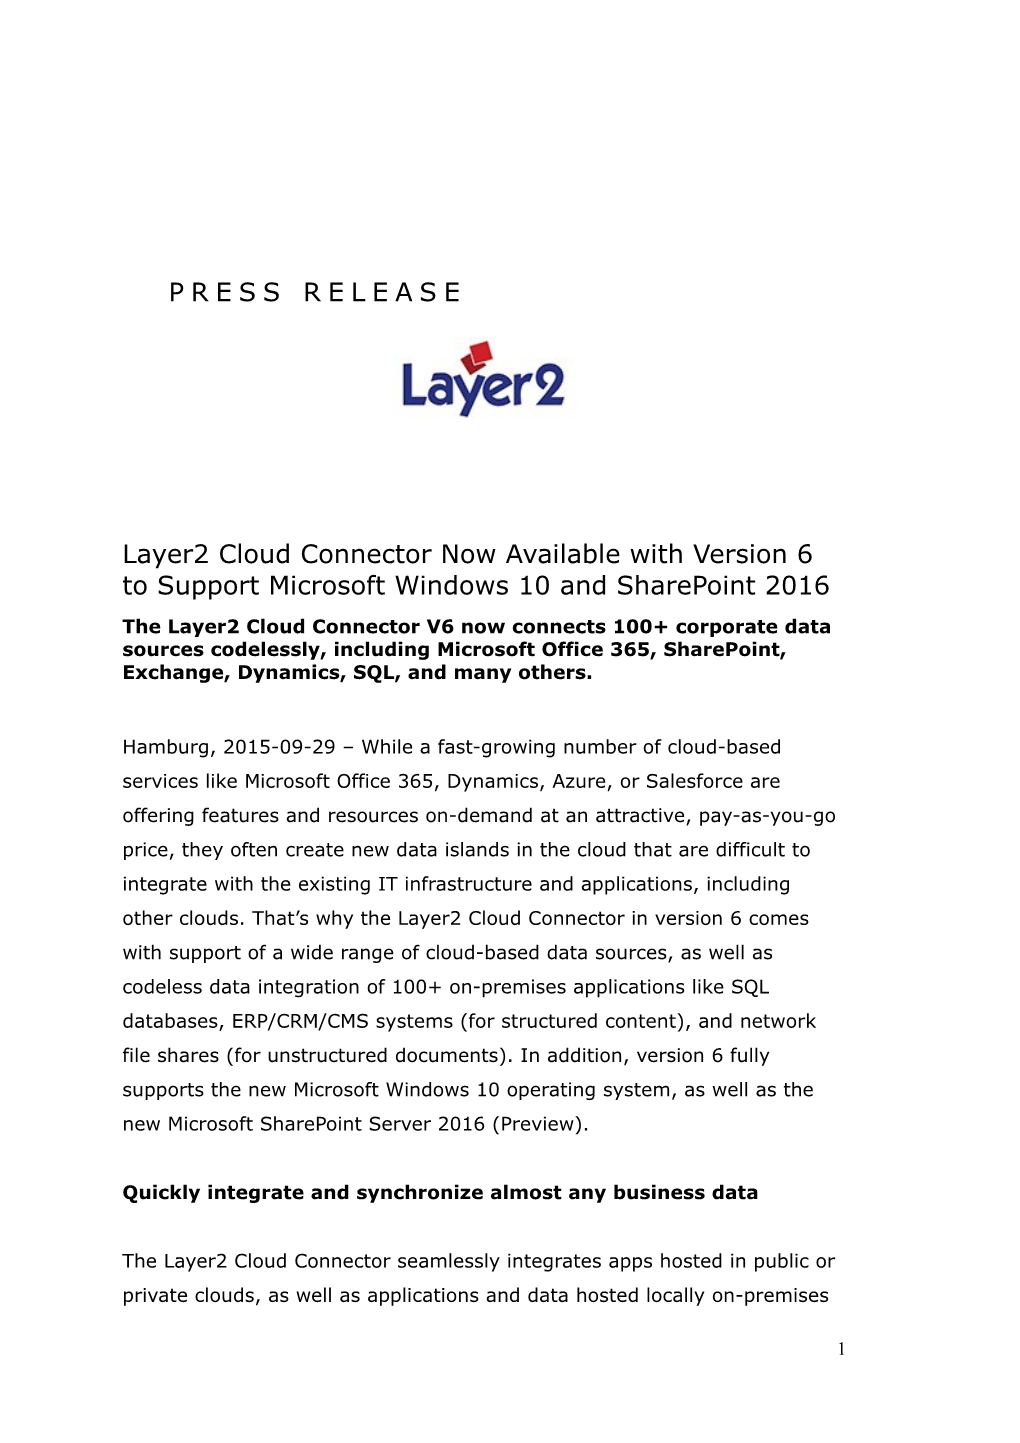 2015-09-29: Layer2 Cloud Connector Now Available with Version 6 to Support Microsoft Windows